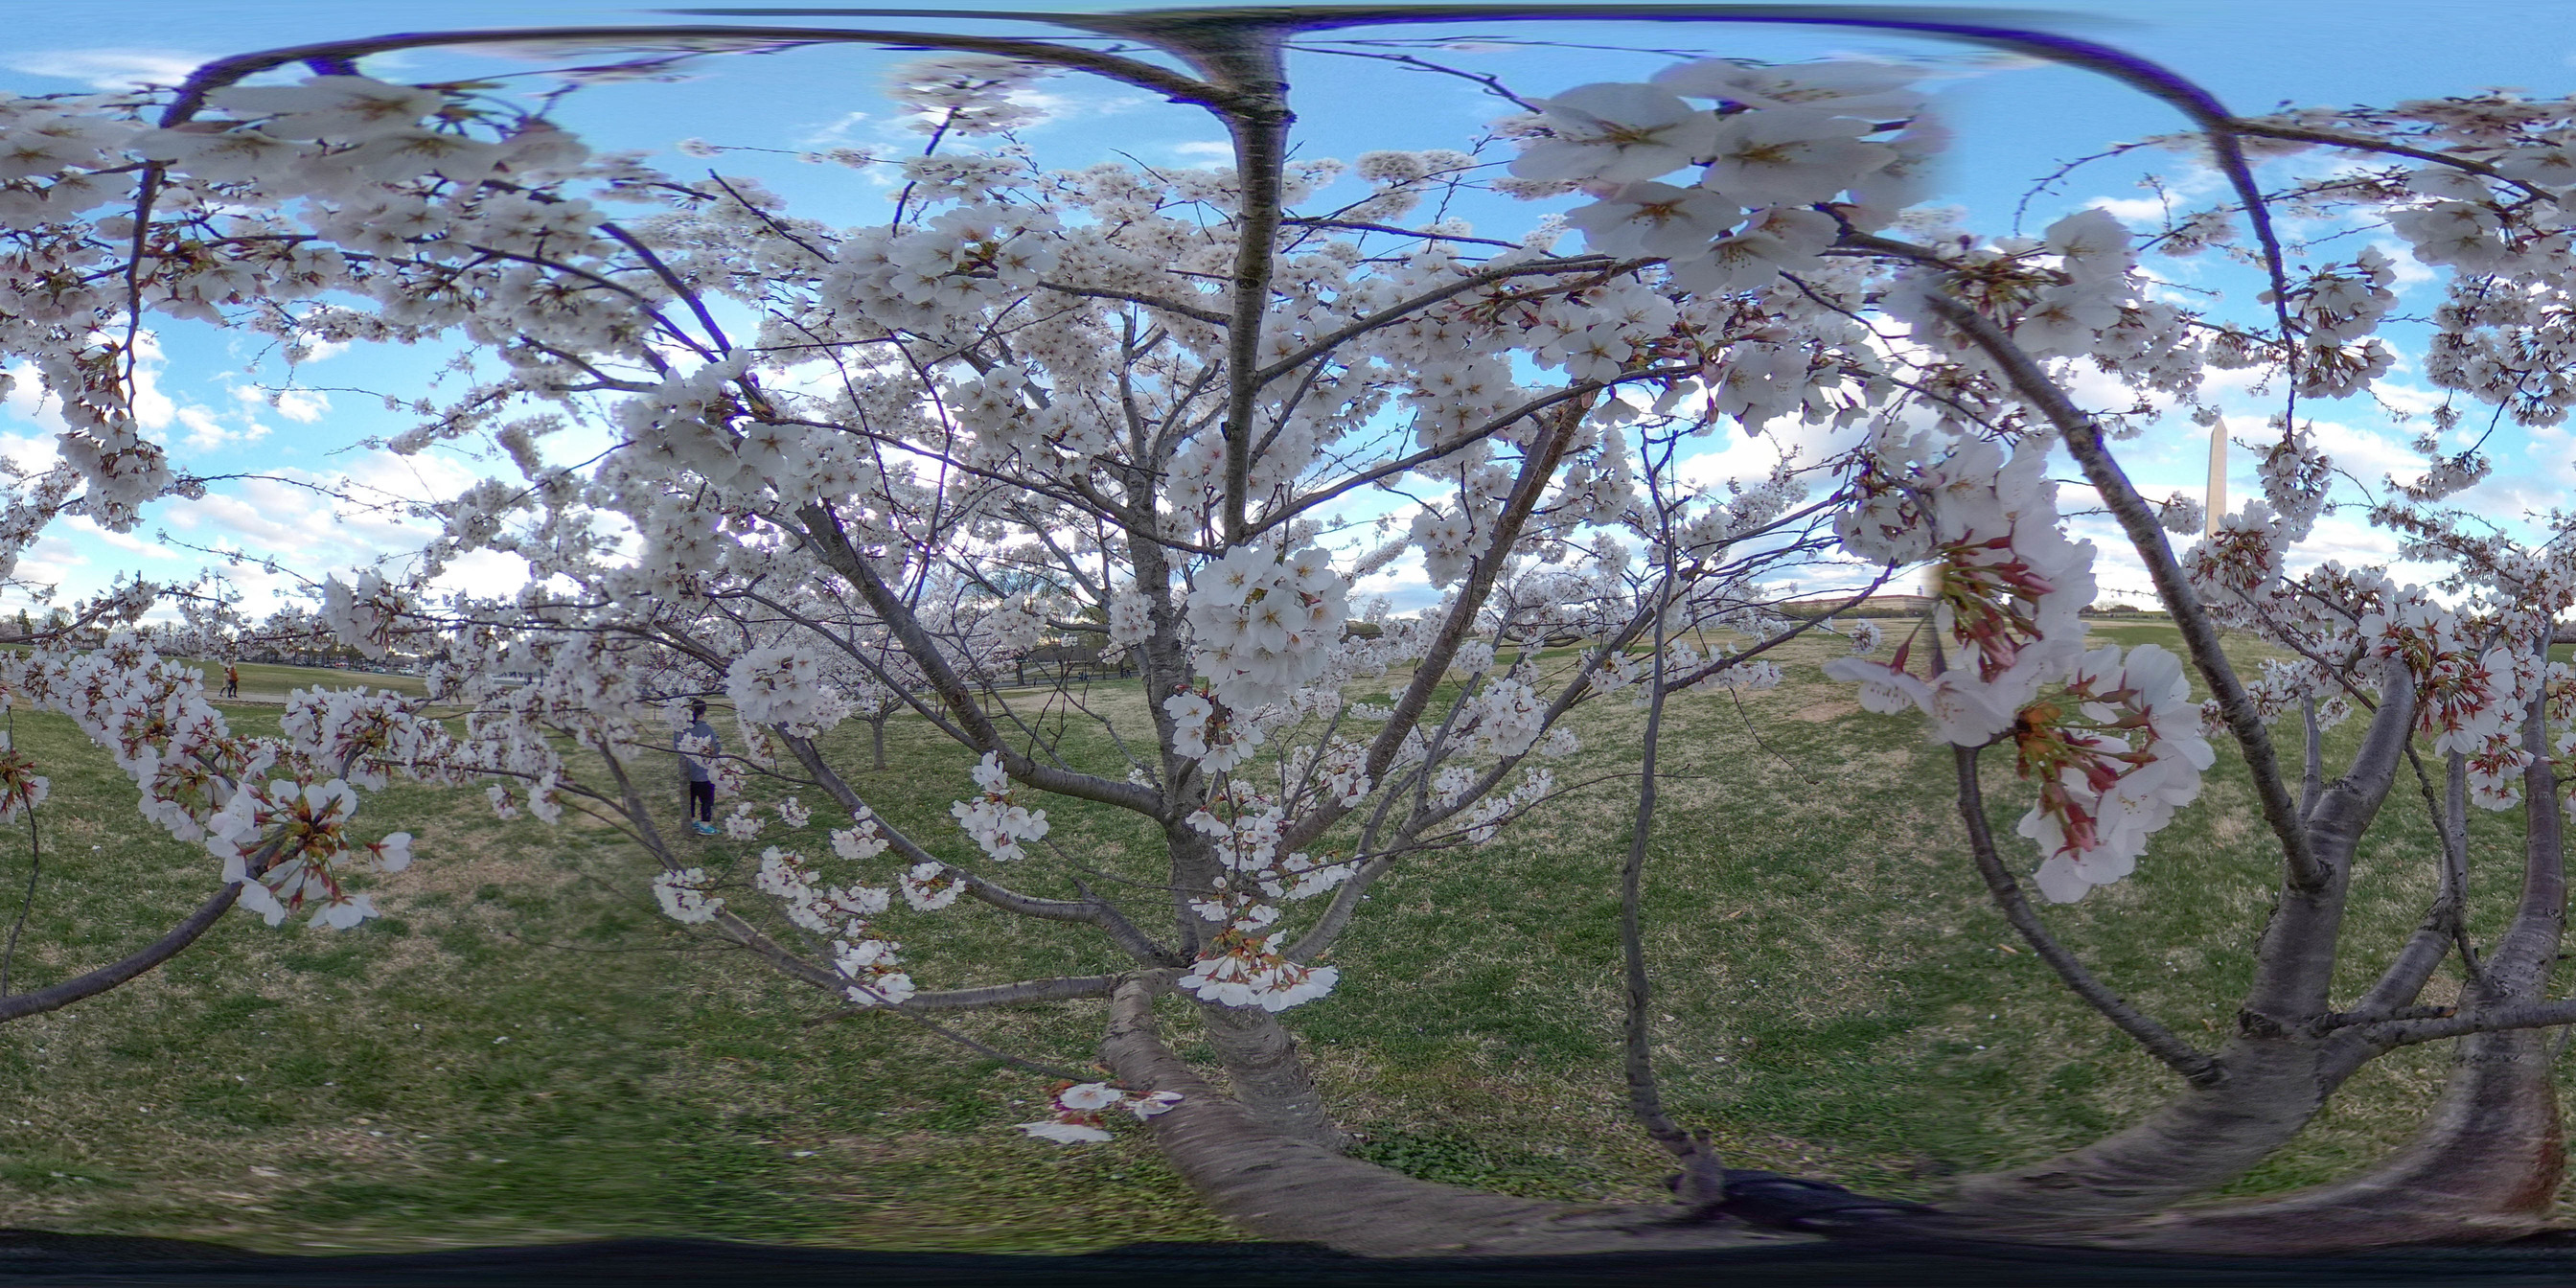 Spherical image inside of a grove of cherry blossom trees in full bloom  with pink blossoms